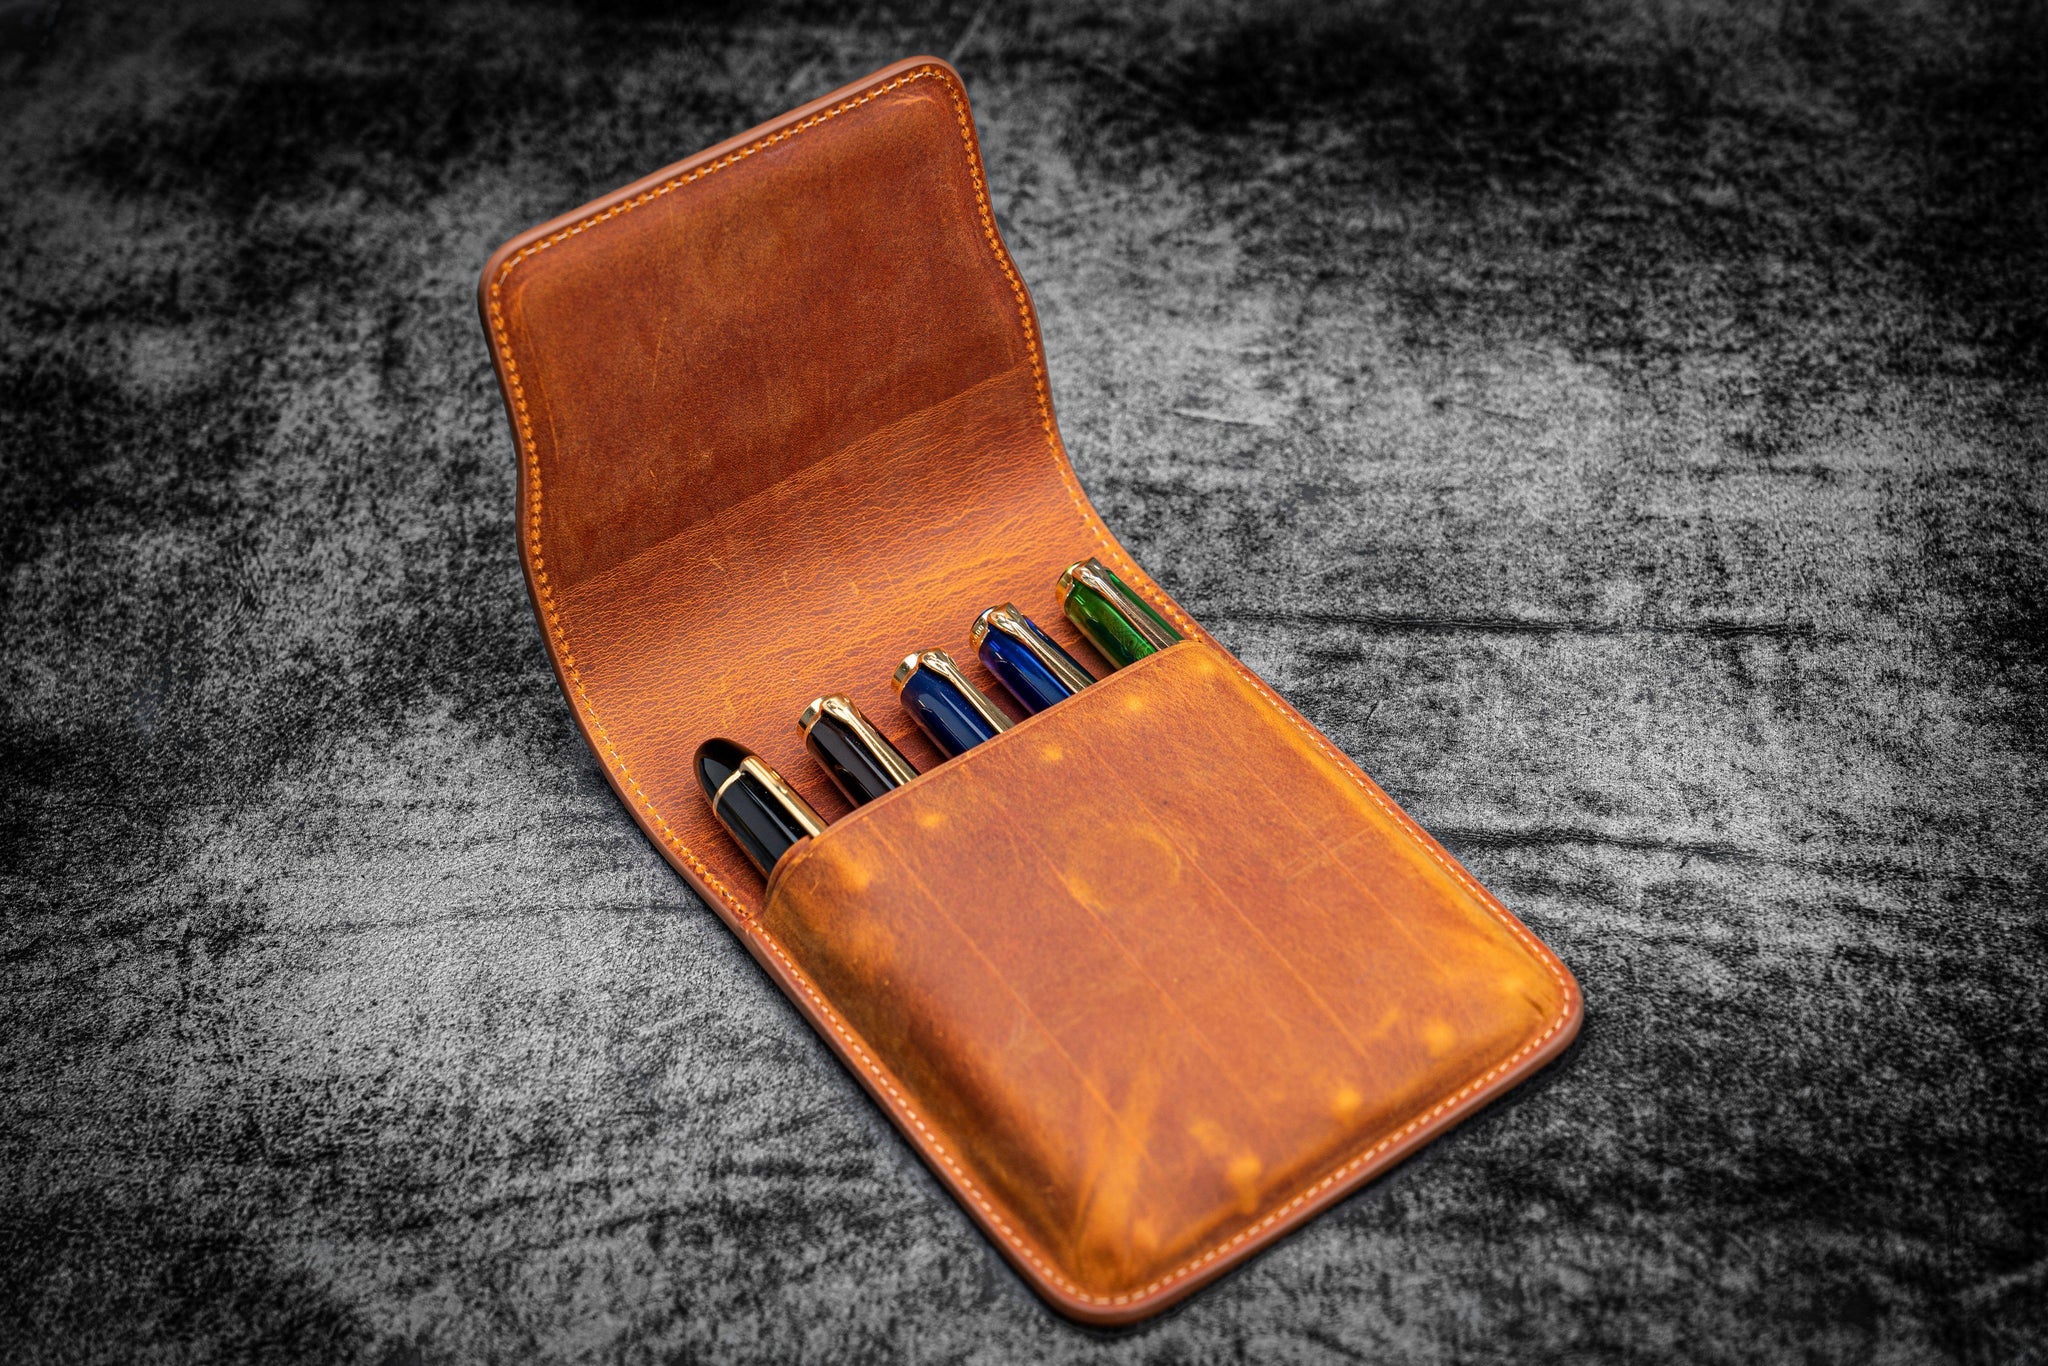 Leather Case for Kaweco Pen - Leather Pocket Pen Case - Galen Leather